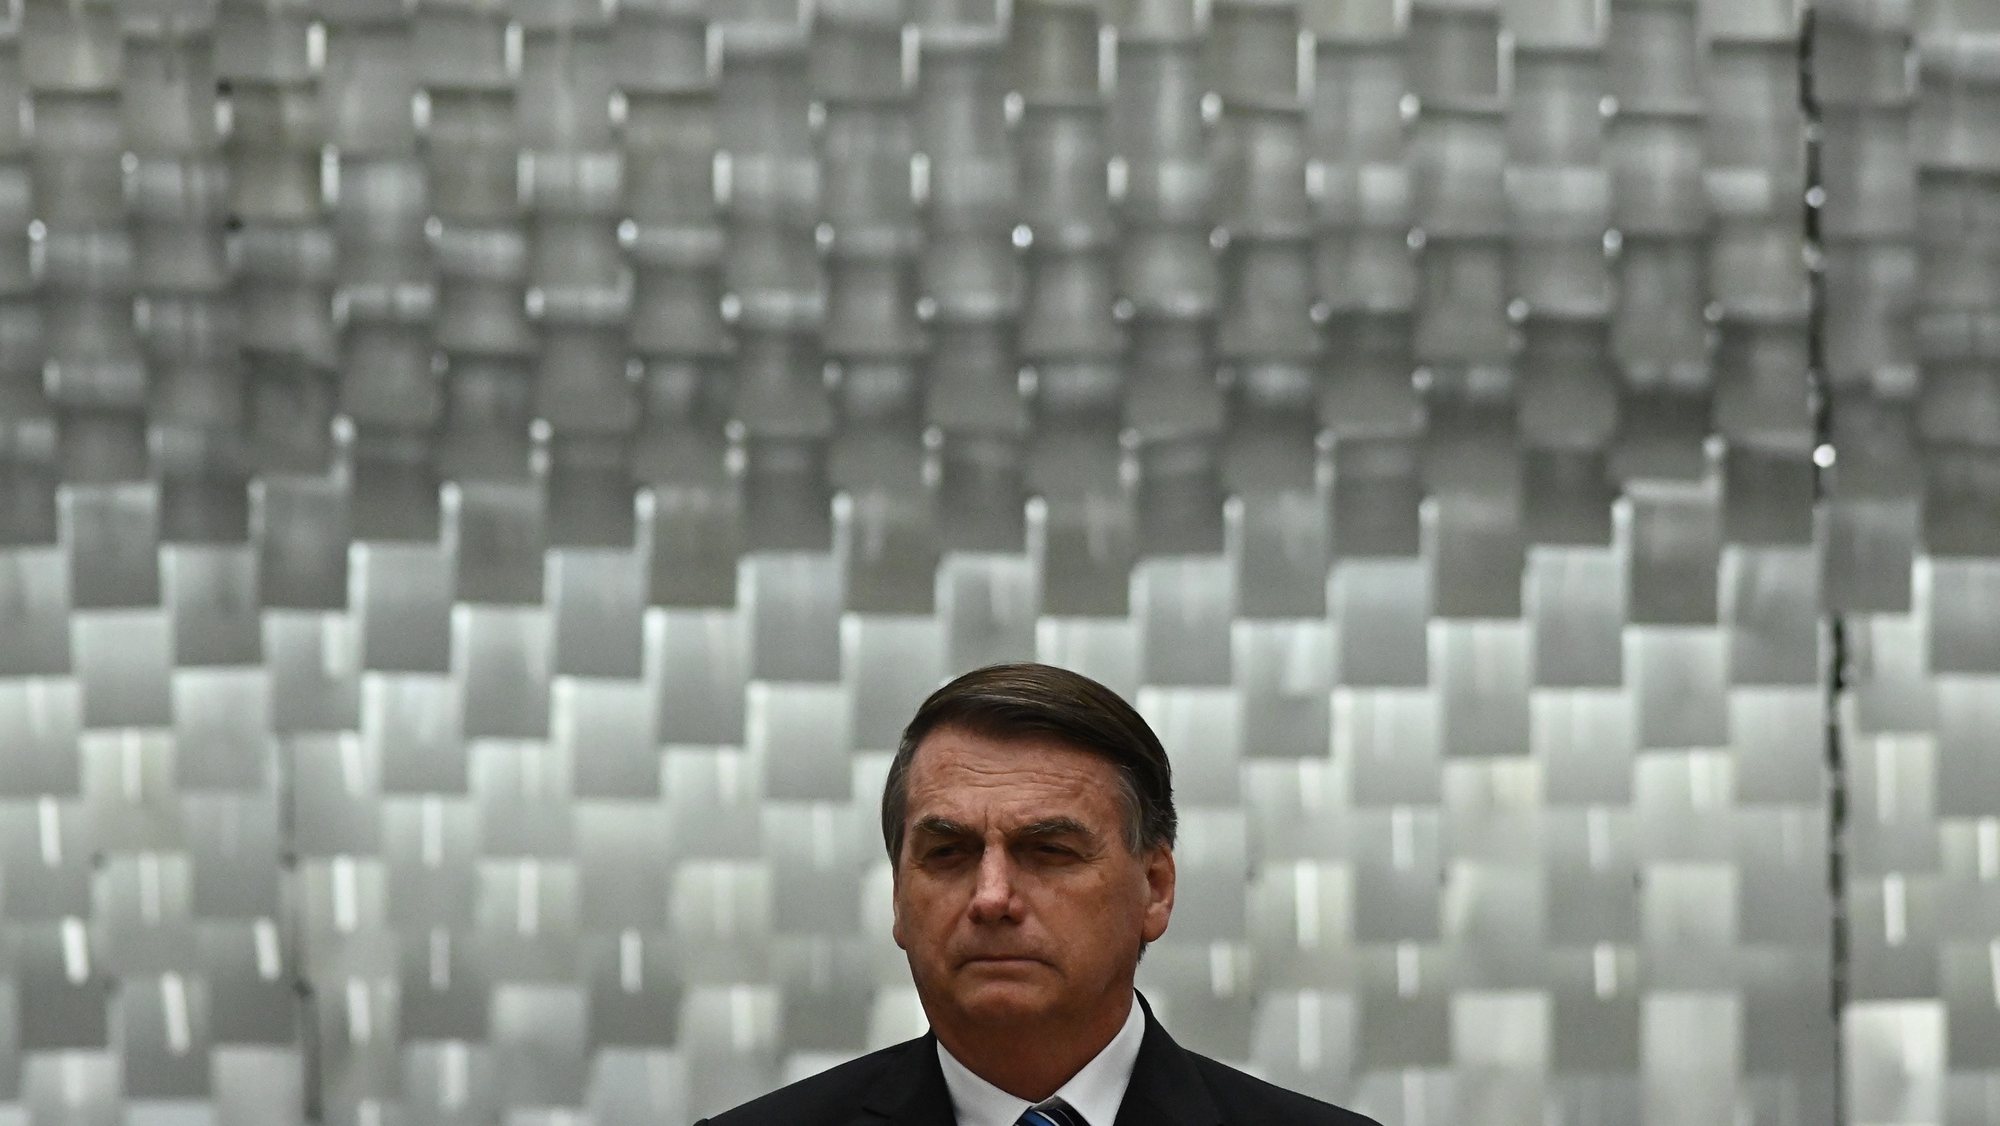 epa10353066 The President of Brazil, Jair Bolsonaro, attends the inauguration ceremony of Messod Azulay and Paulo Sergio Domingues as new judges of the Superior Court of Justice (STJ), in Brasilia, Brazil, 06 December 2022.  EPA/Andre Borges